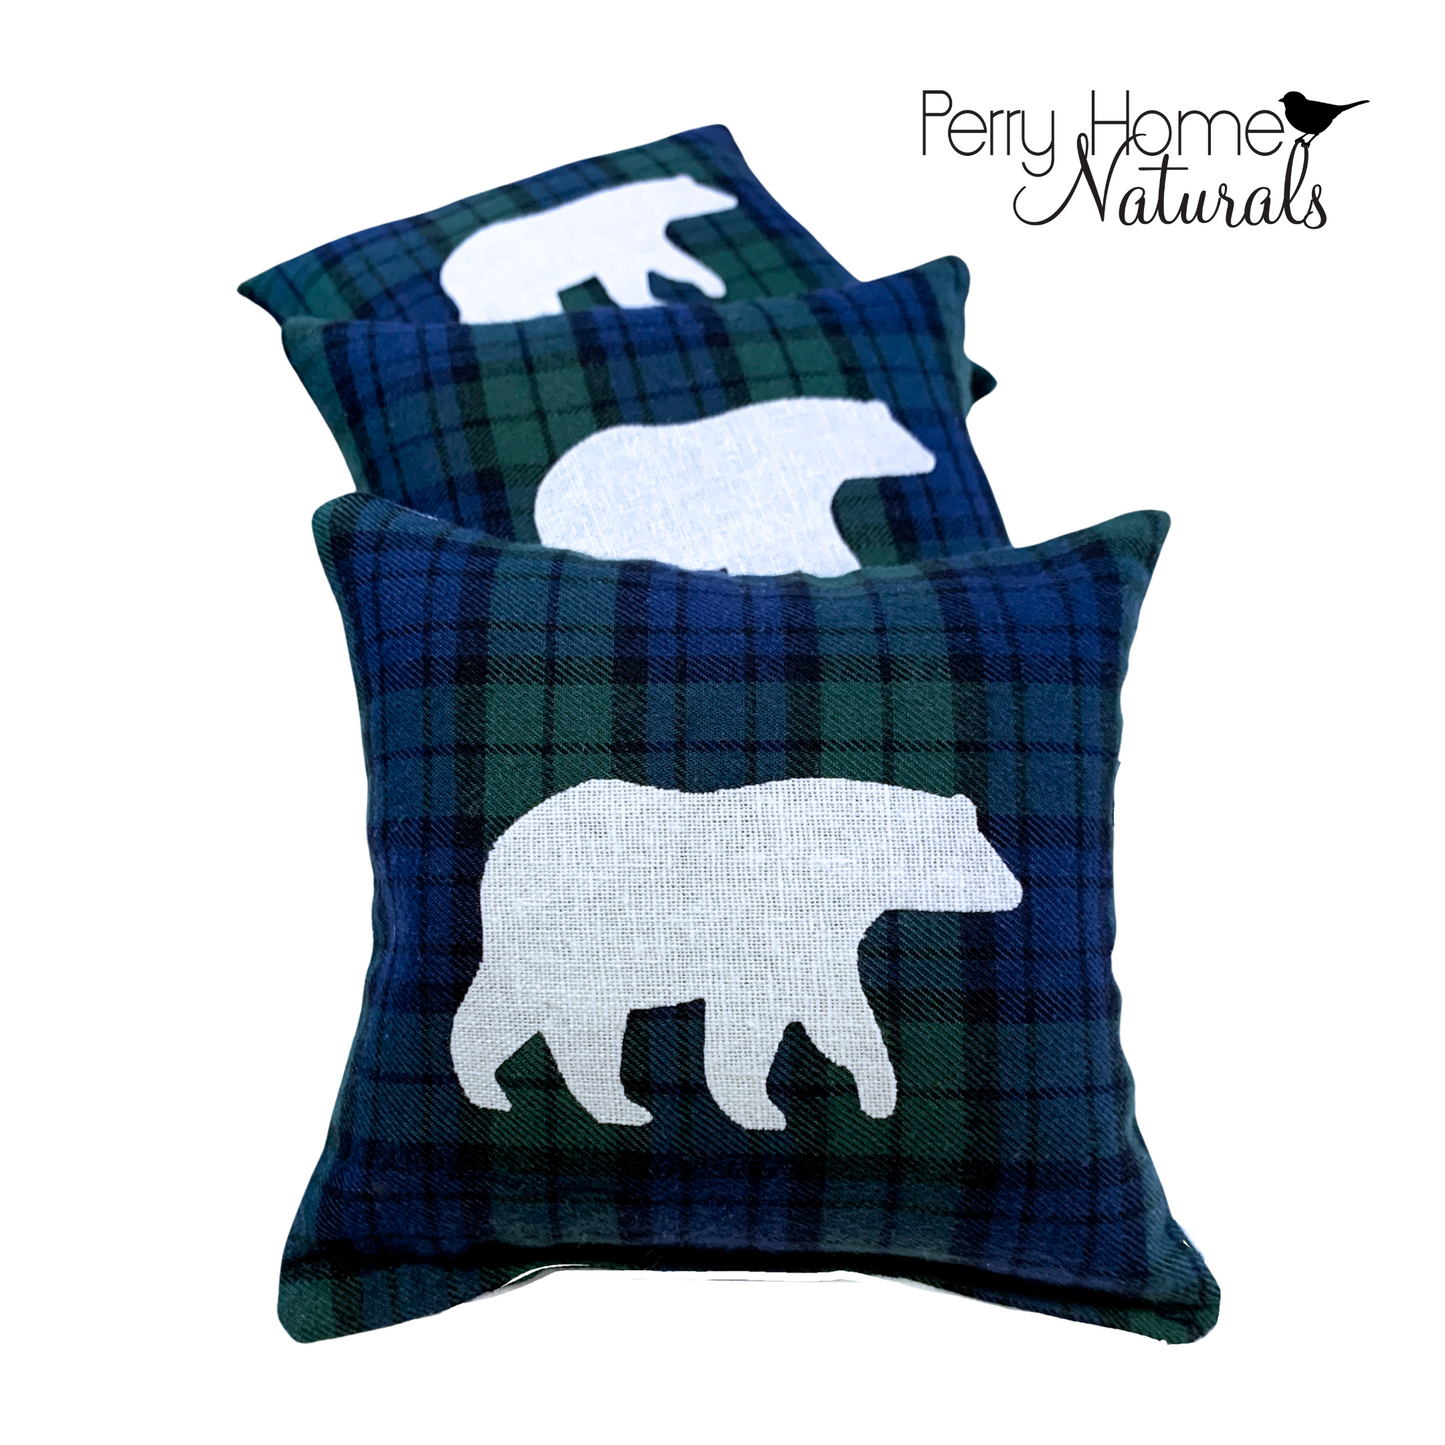 Hunter + Navy Plaid Sachets with Choice of White Linen Applique Design and Scent